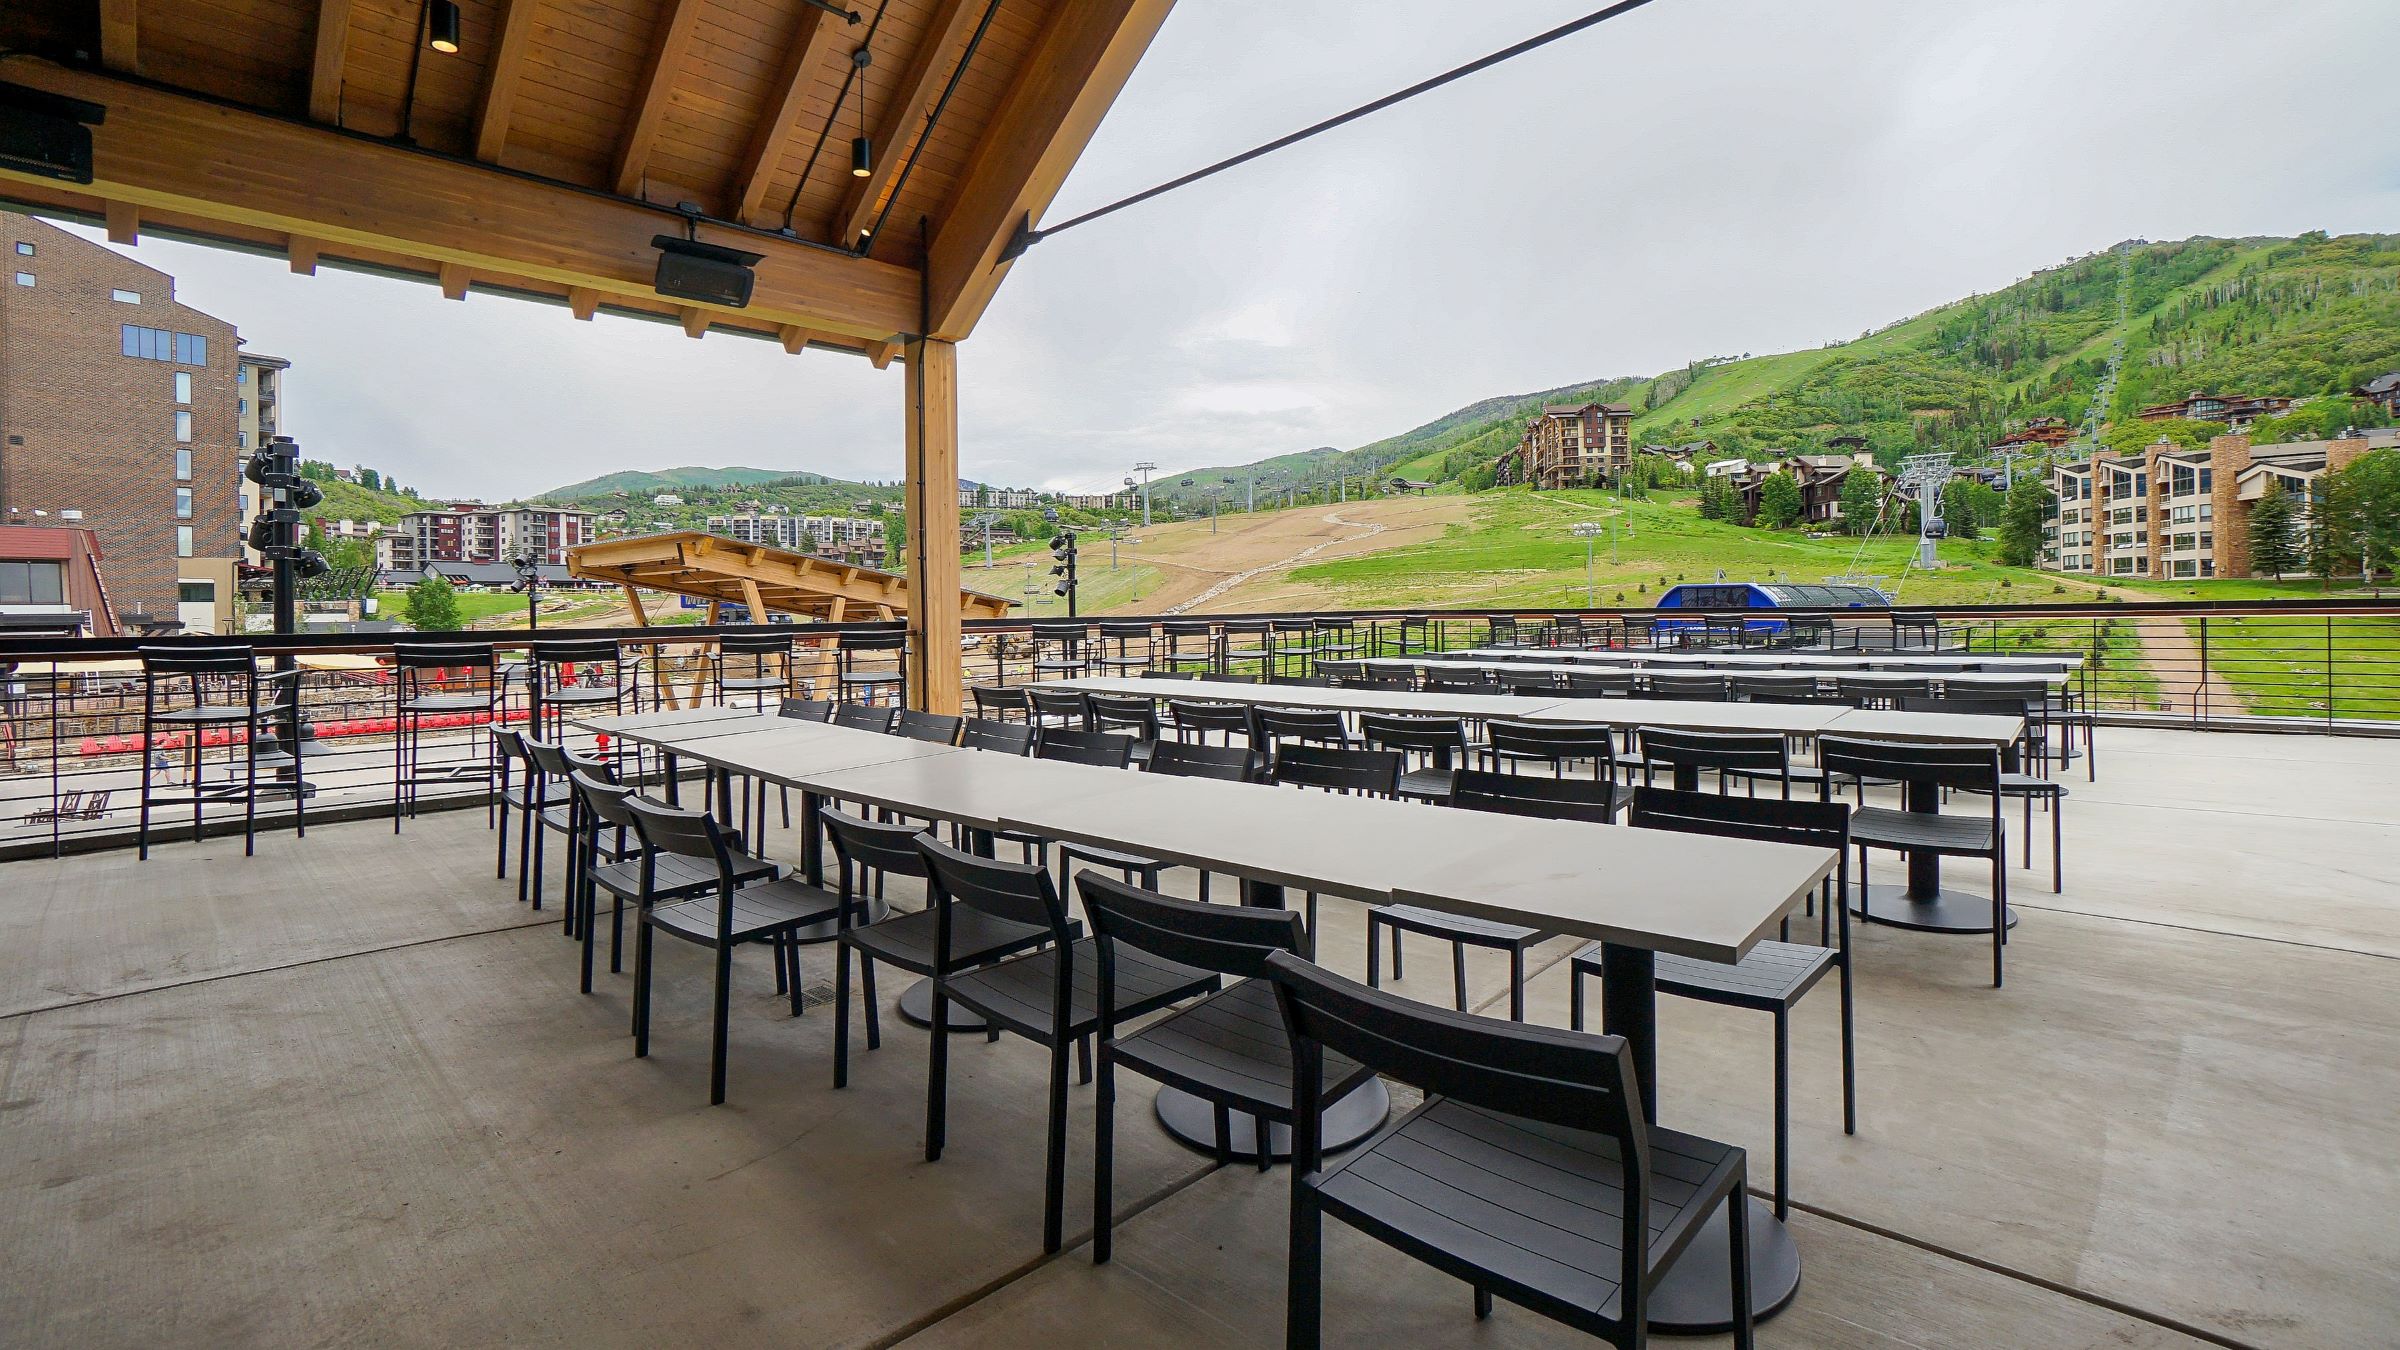 Upper level of The Range Food & Drink Hall at Steamboat Resort.